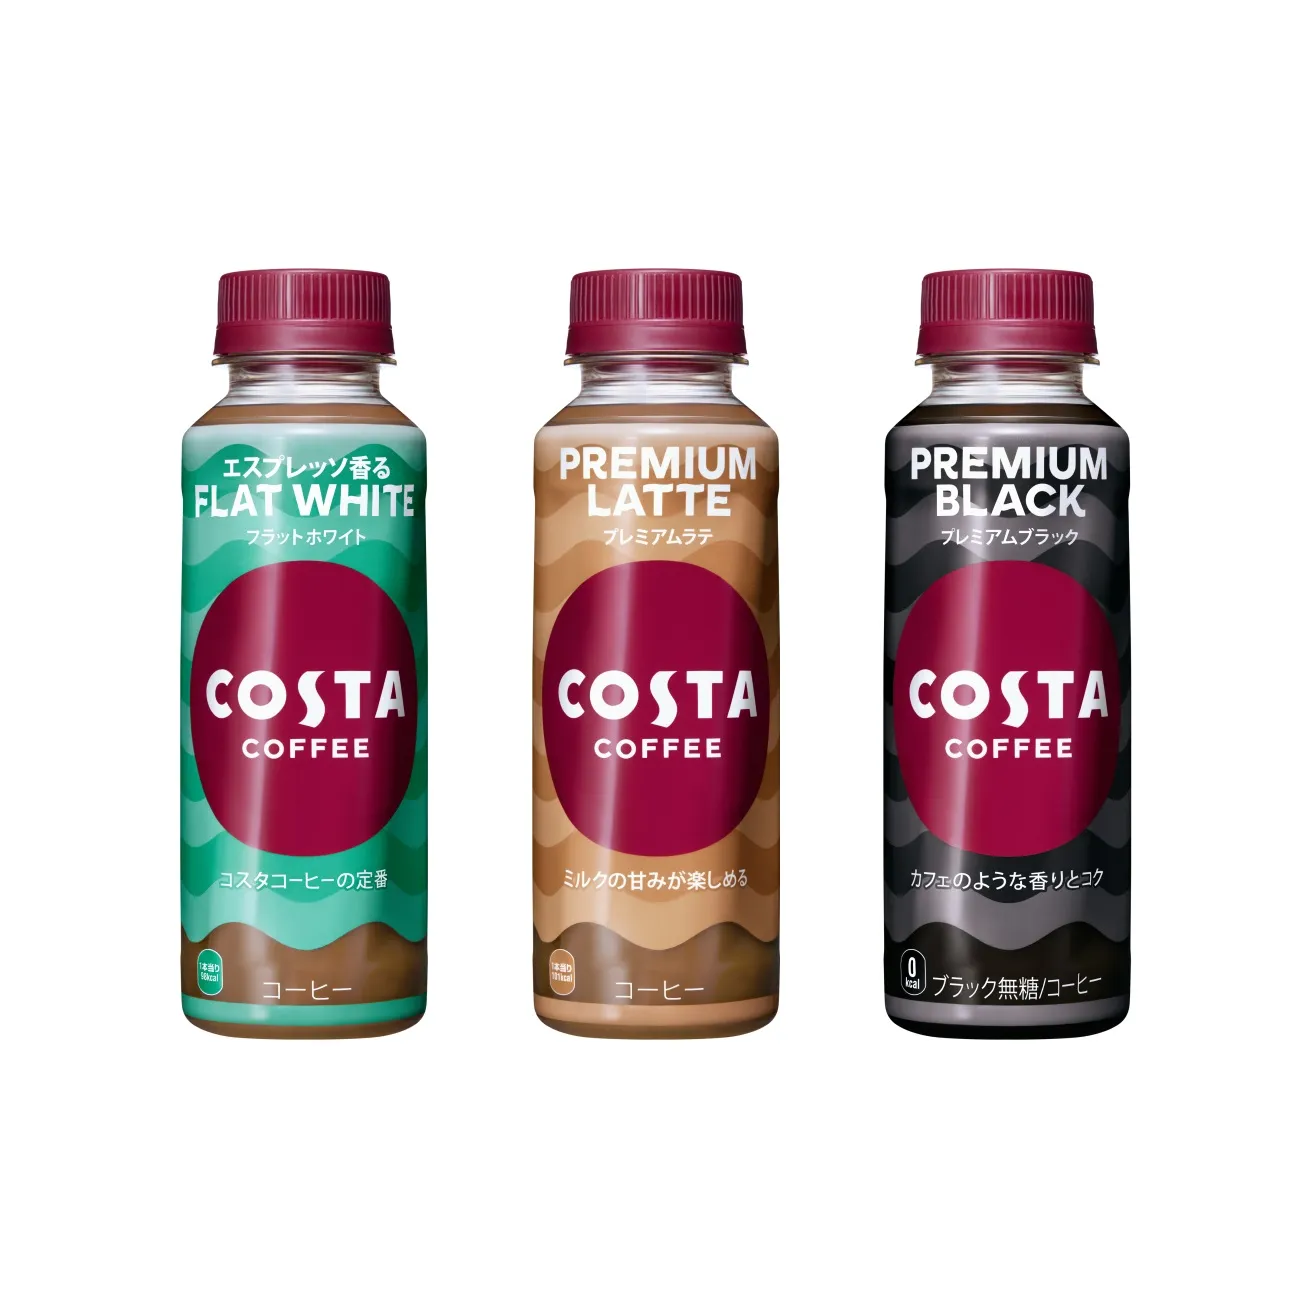 Costa joins Japanese canned coffee brands